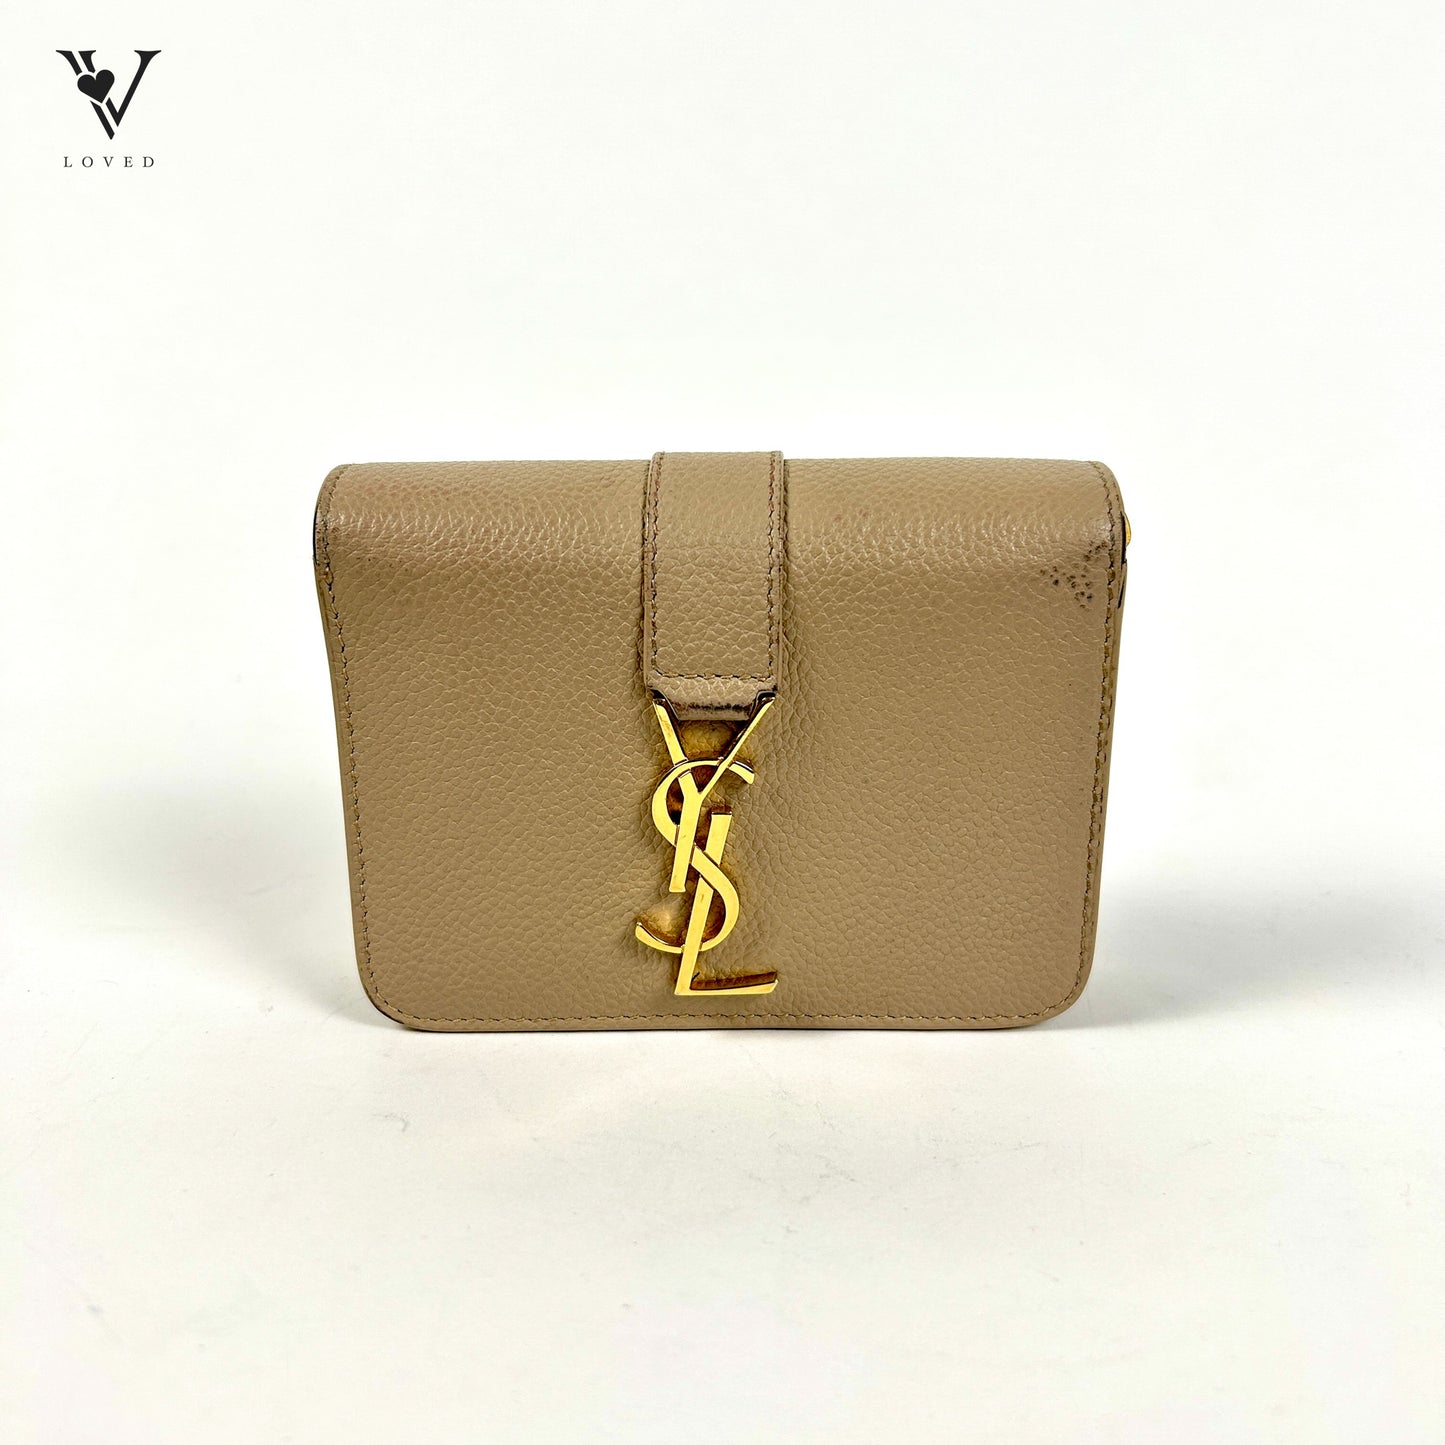 Yves Saint Laurent Line Compact Zippered Wallet in Grained Leather